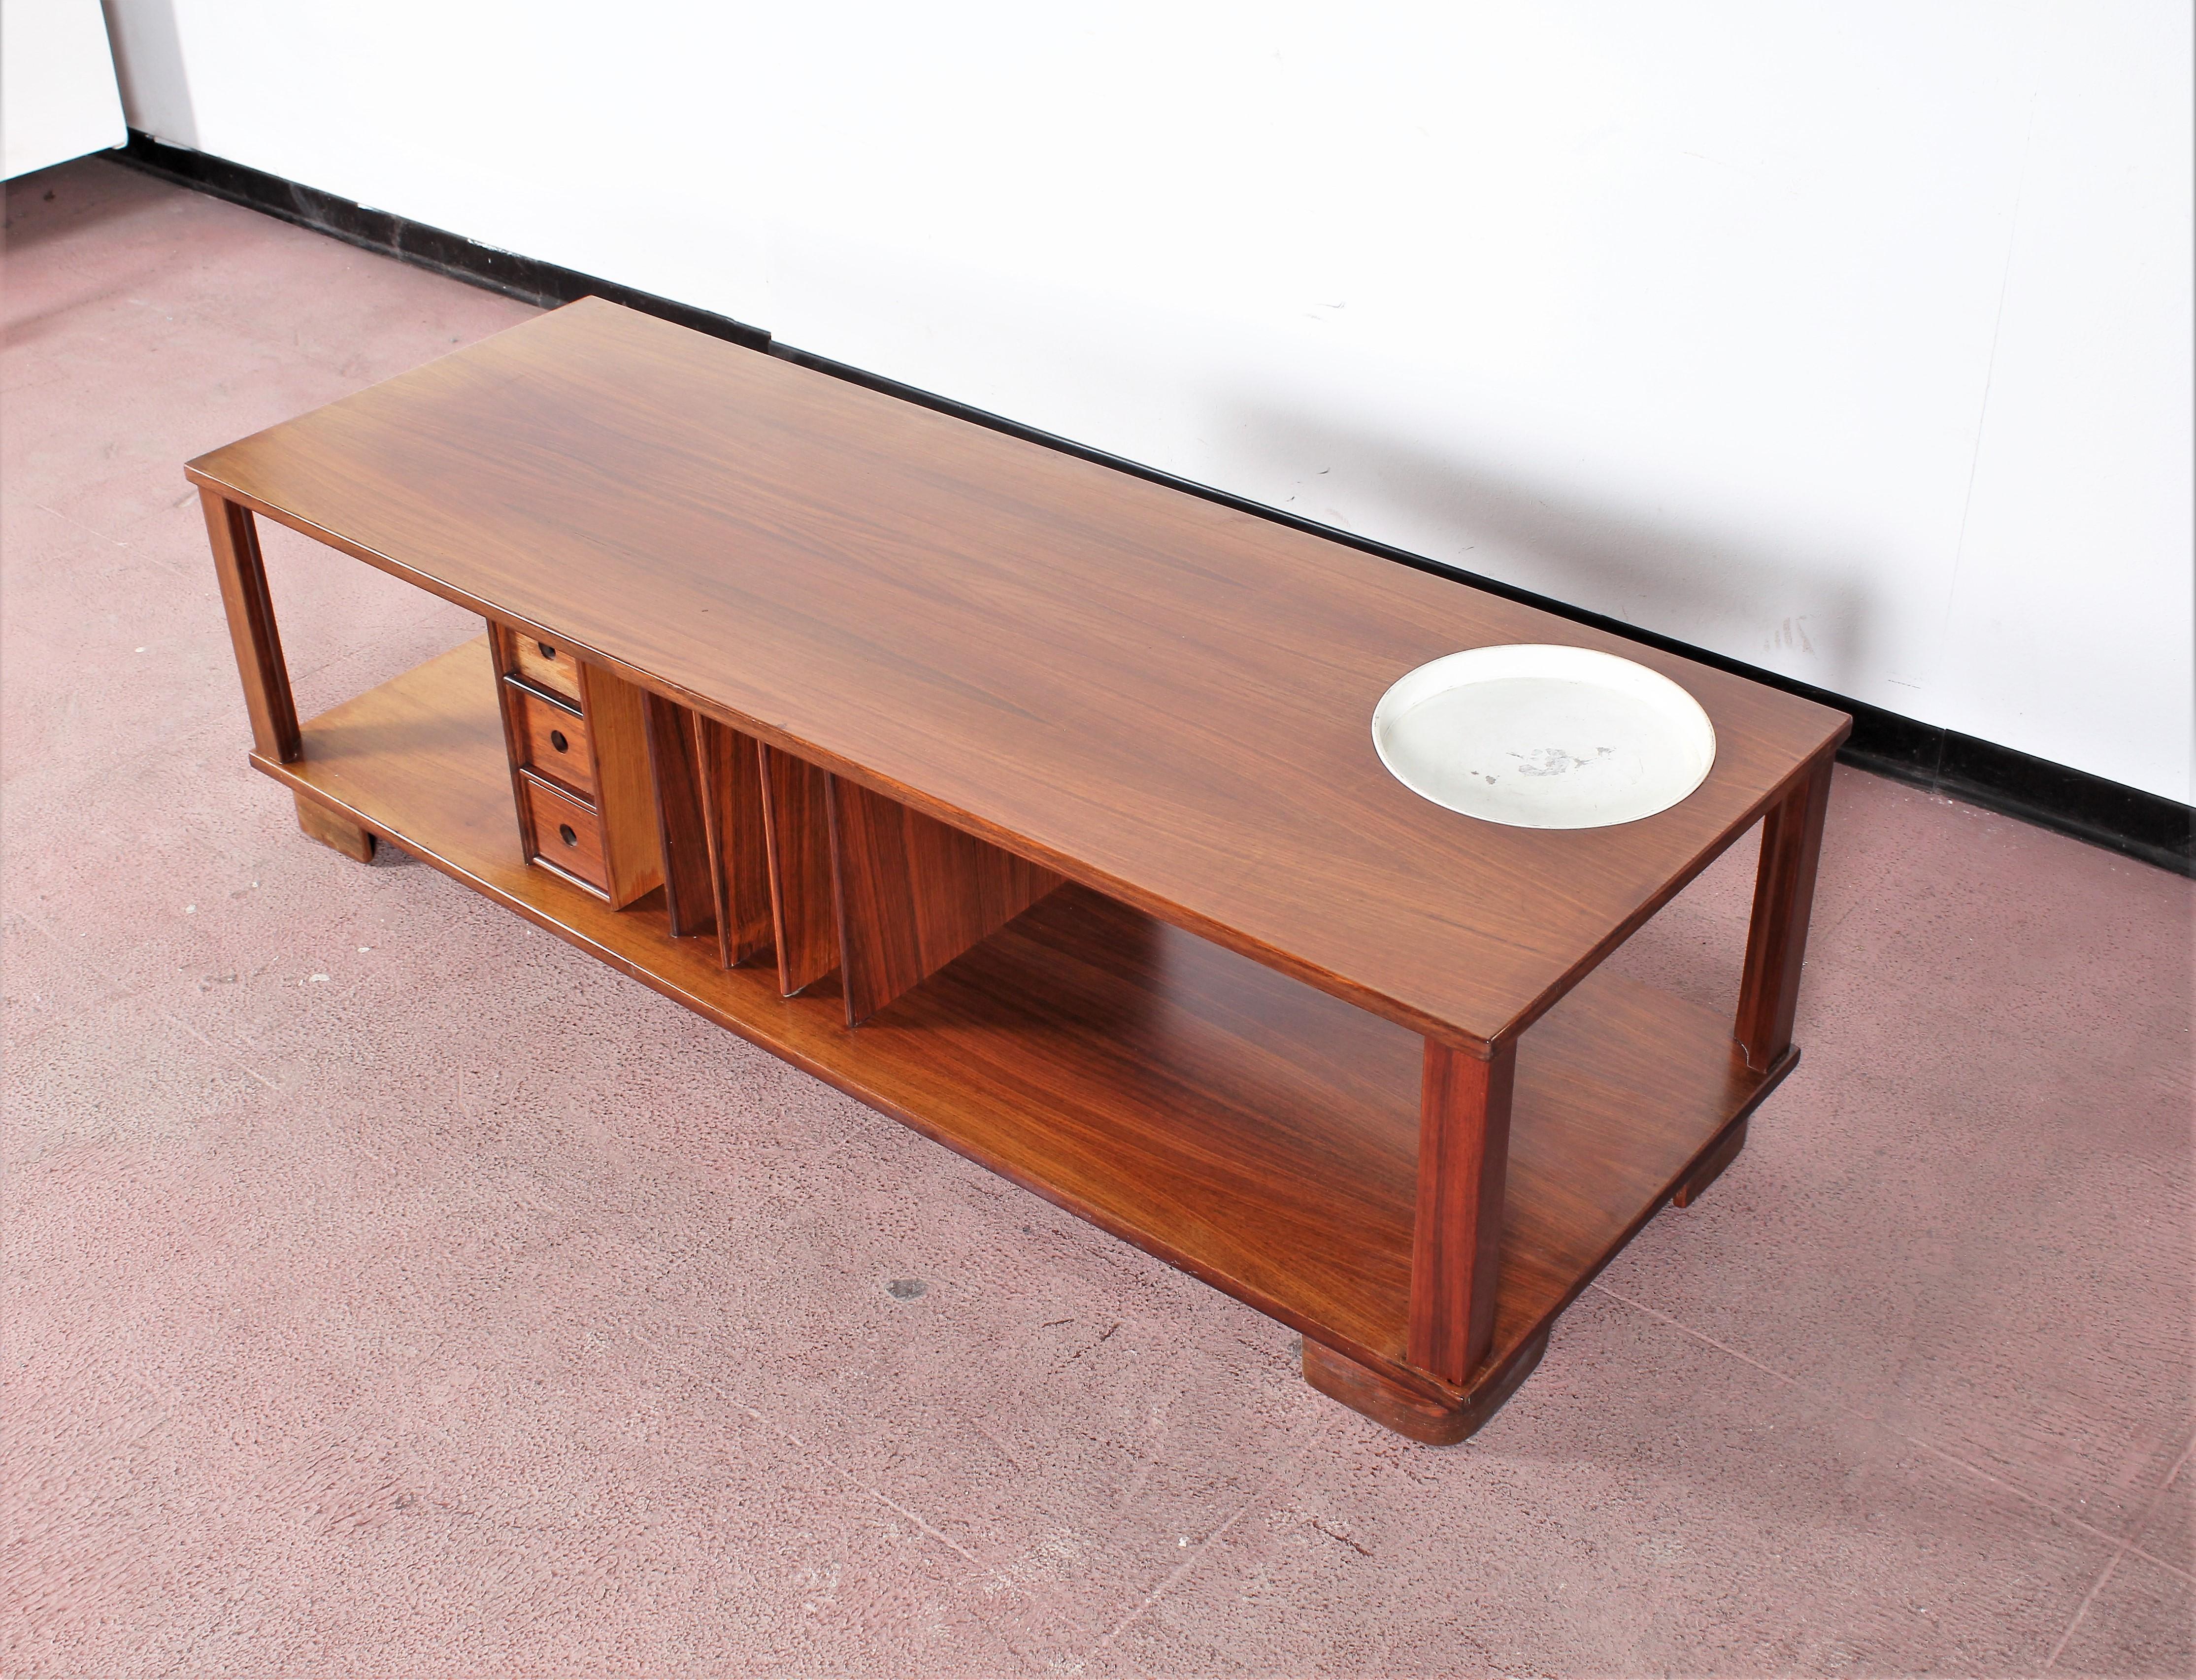 Beautiful 1960s coffee table, Danish Minimalist design. Teak finishes. Side-to-side vertical compartments, magazine or book stands, three small rectangular drawers, which can be edged on both sides, and a removable circular metal tray. Kept in good